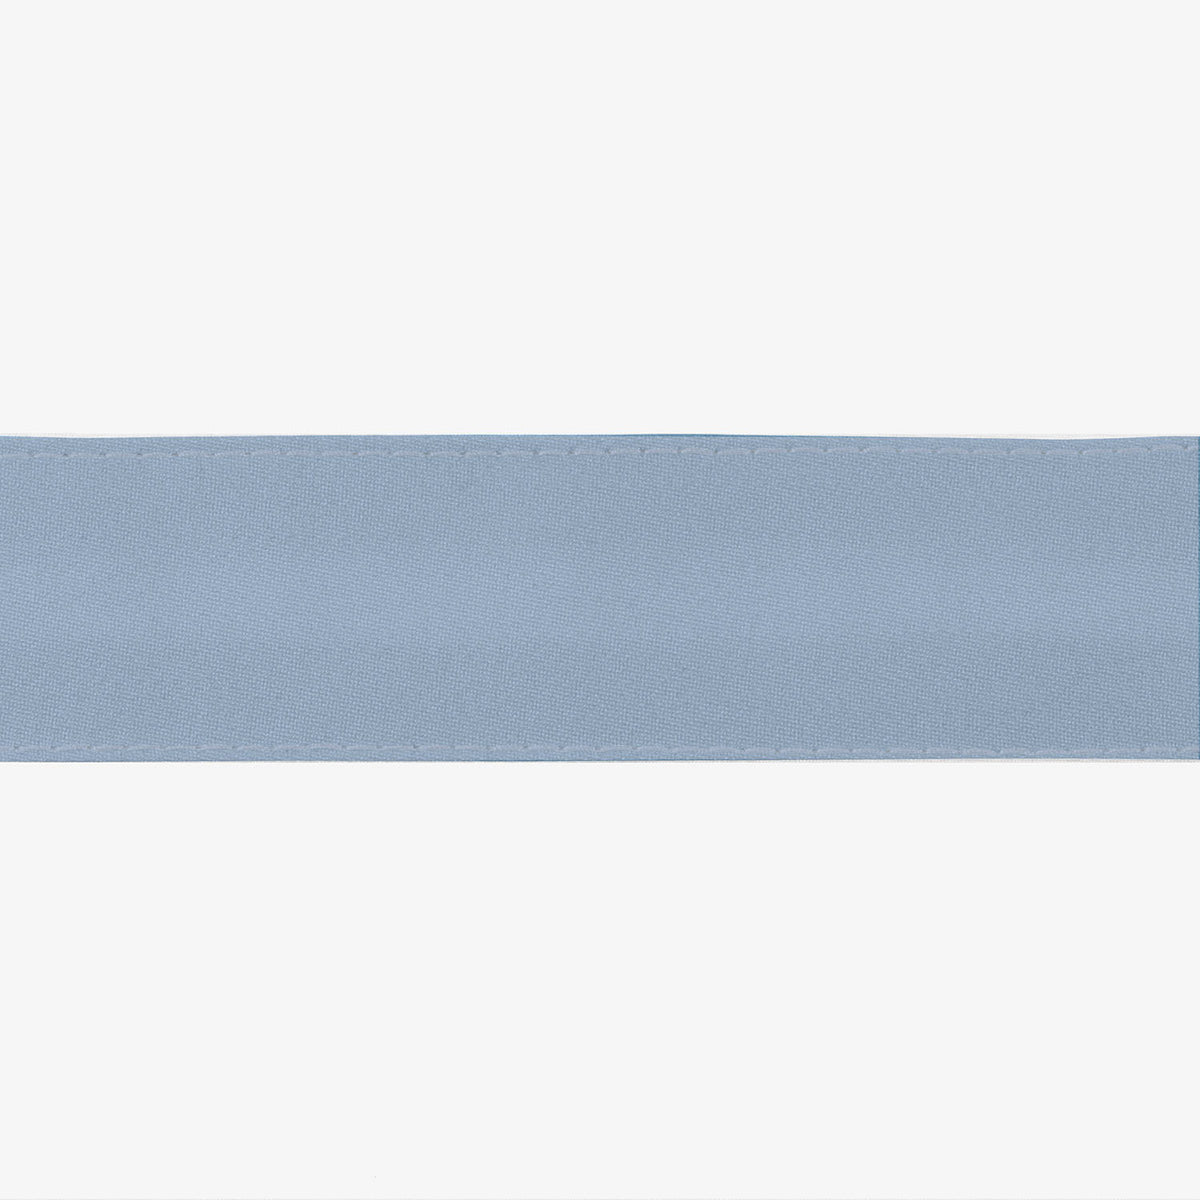 Swatch Sample of Matouk Lowell Tissue Box Cover in Color Hazy Blue